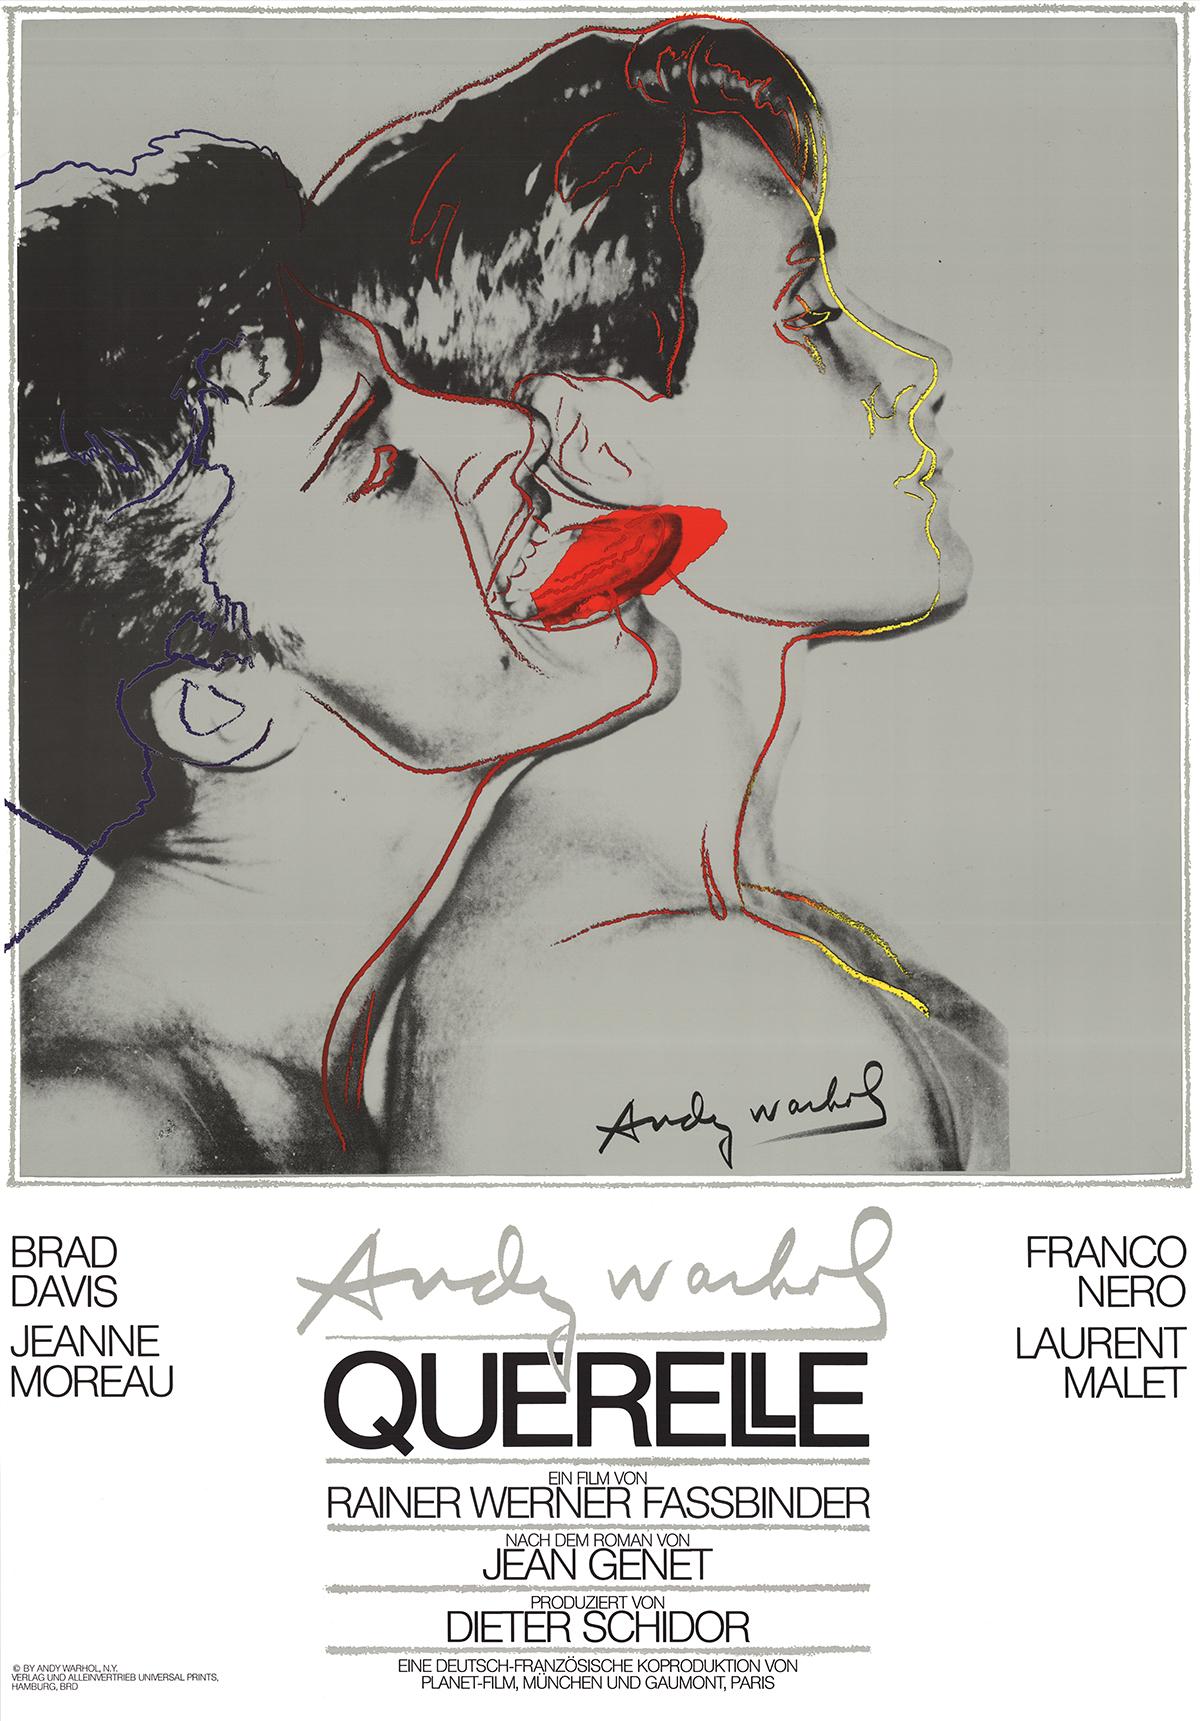 First edition poster for film "Querelle," directed by Rainer Werner Fassbinder that Warhol was commissioned for.  The film starred Brad Davis, Franco Nero, and Jeanne Moreau
